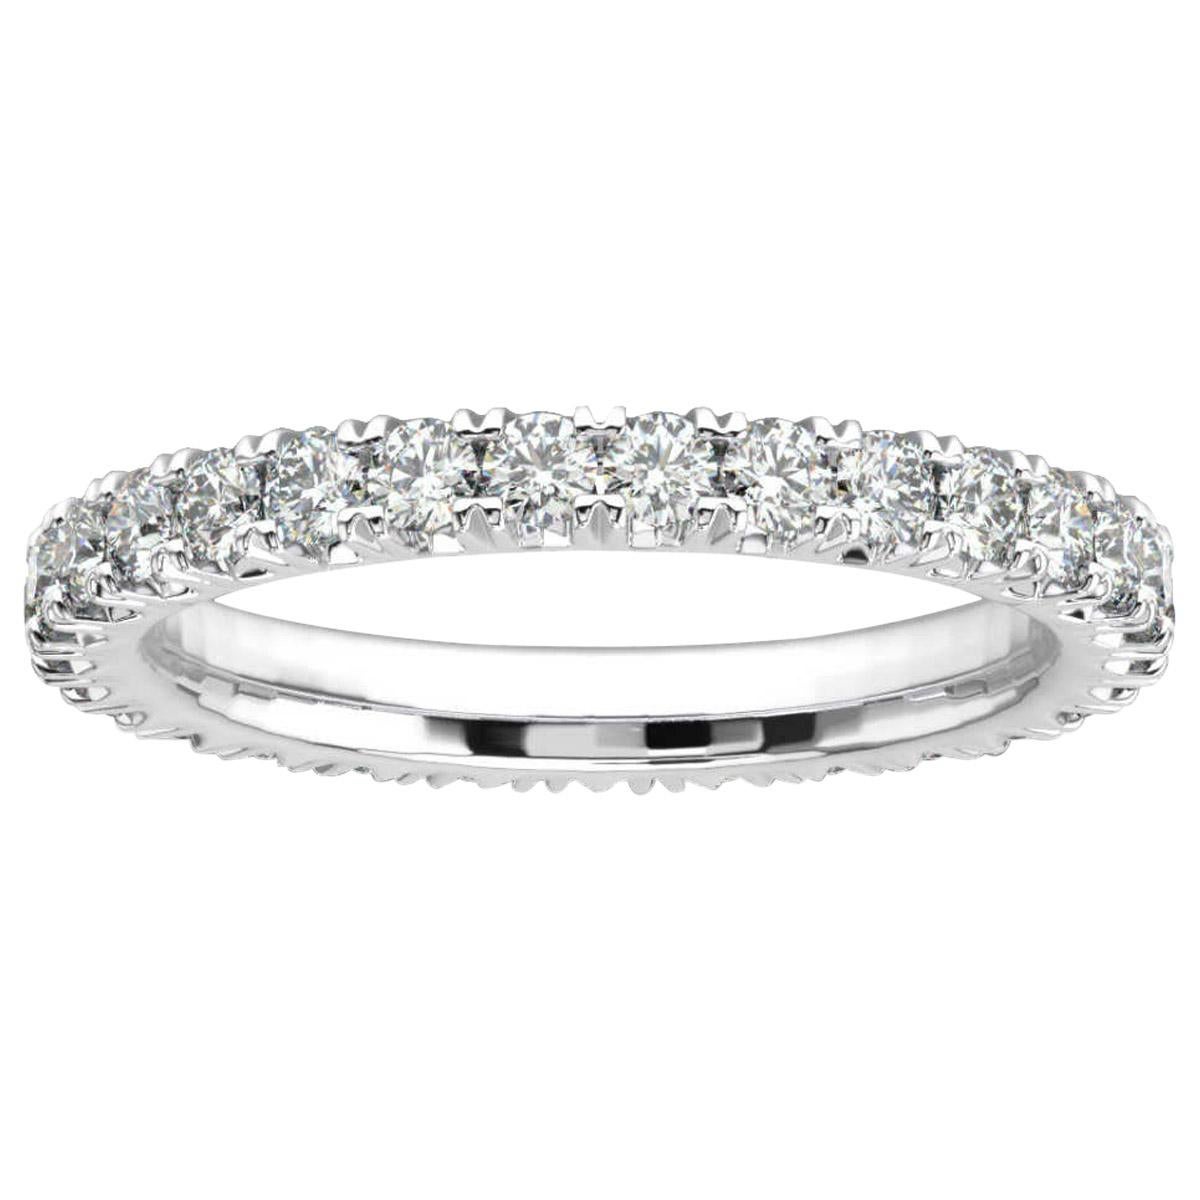 Platinum Audrey French Pave Eternity Ring '1 Ct. tw'